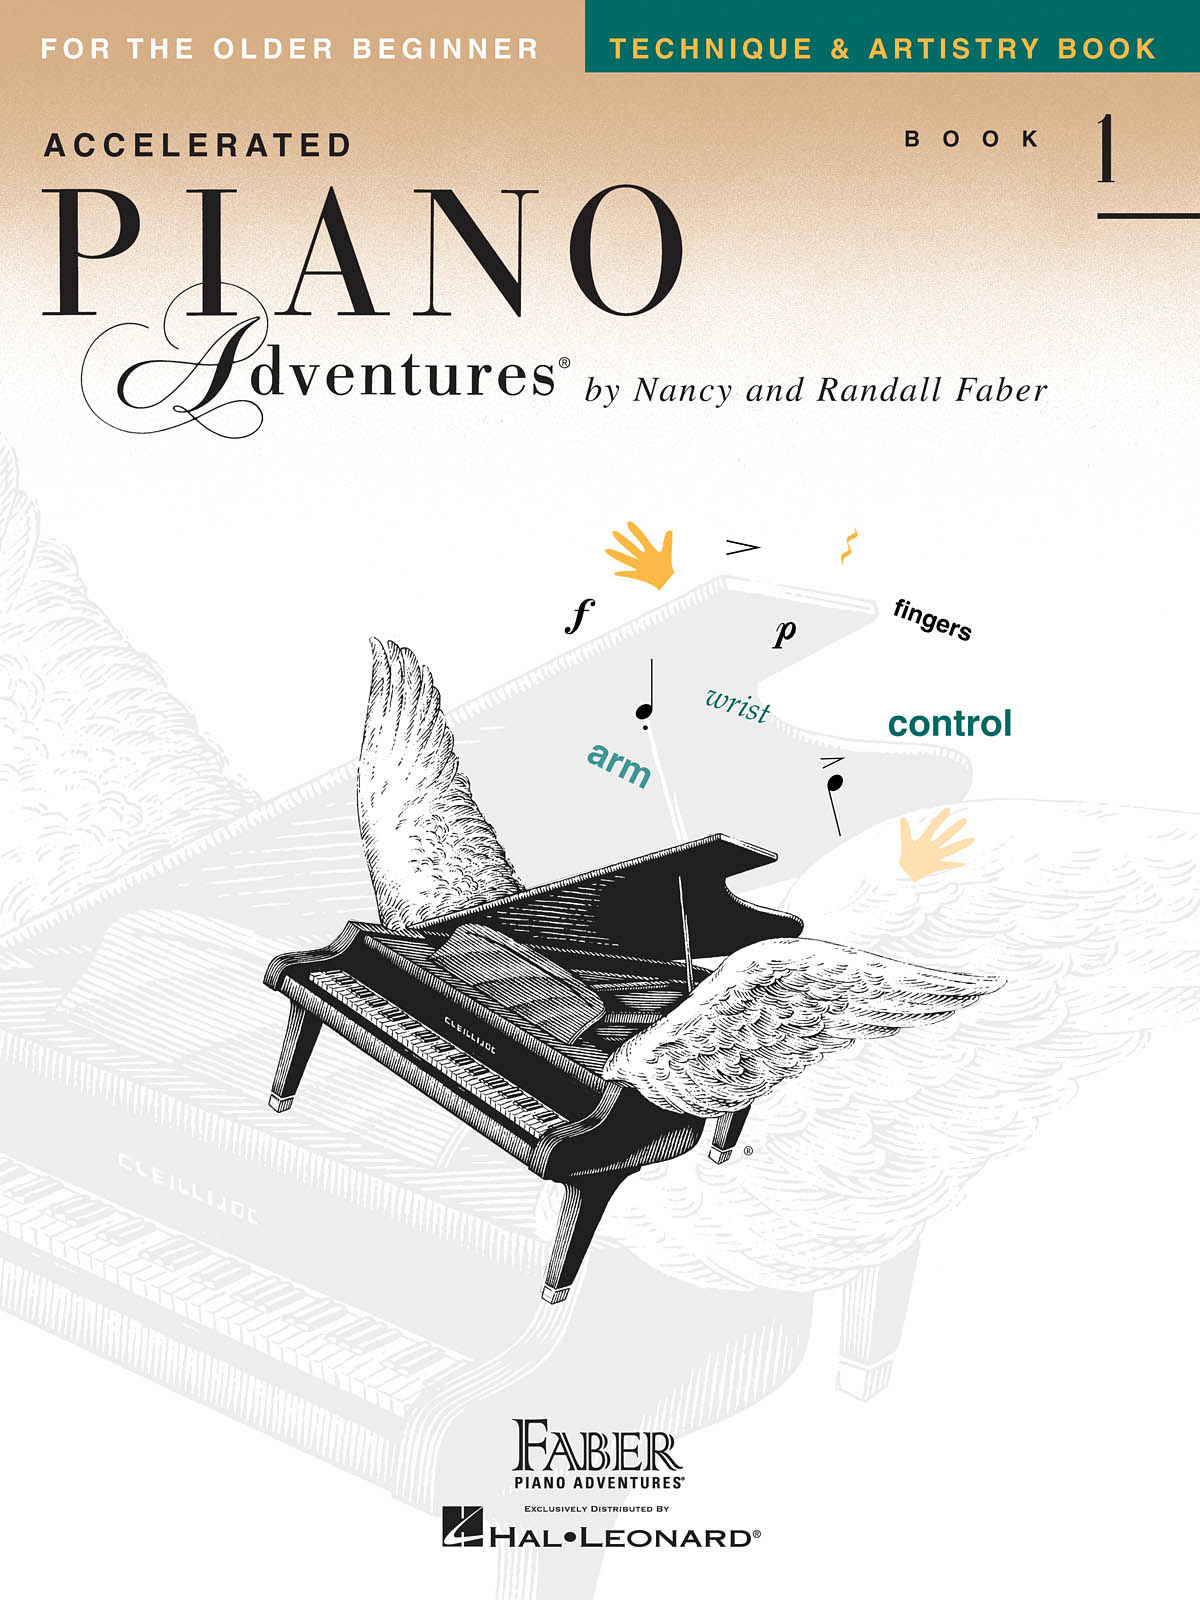 Accelerated Piano Adventures Technique & Artistry Book 1